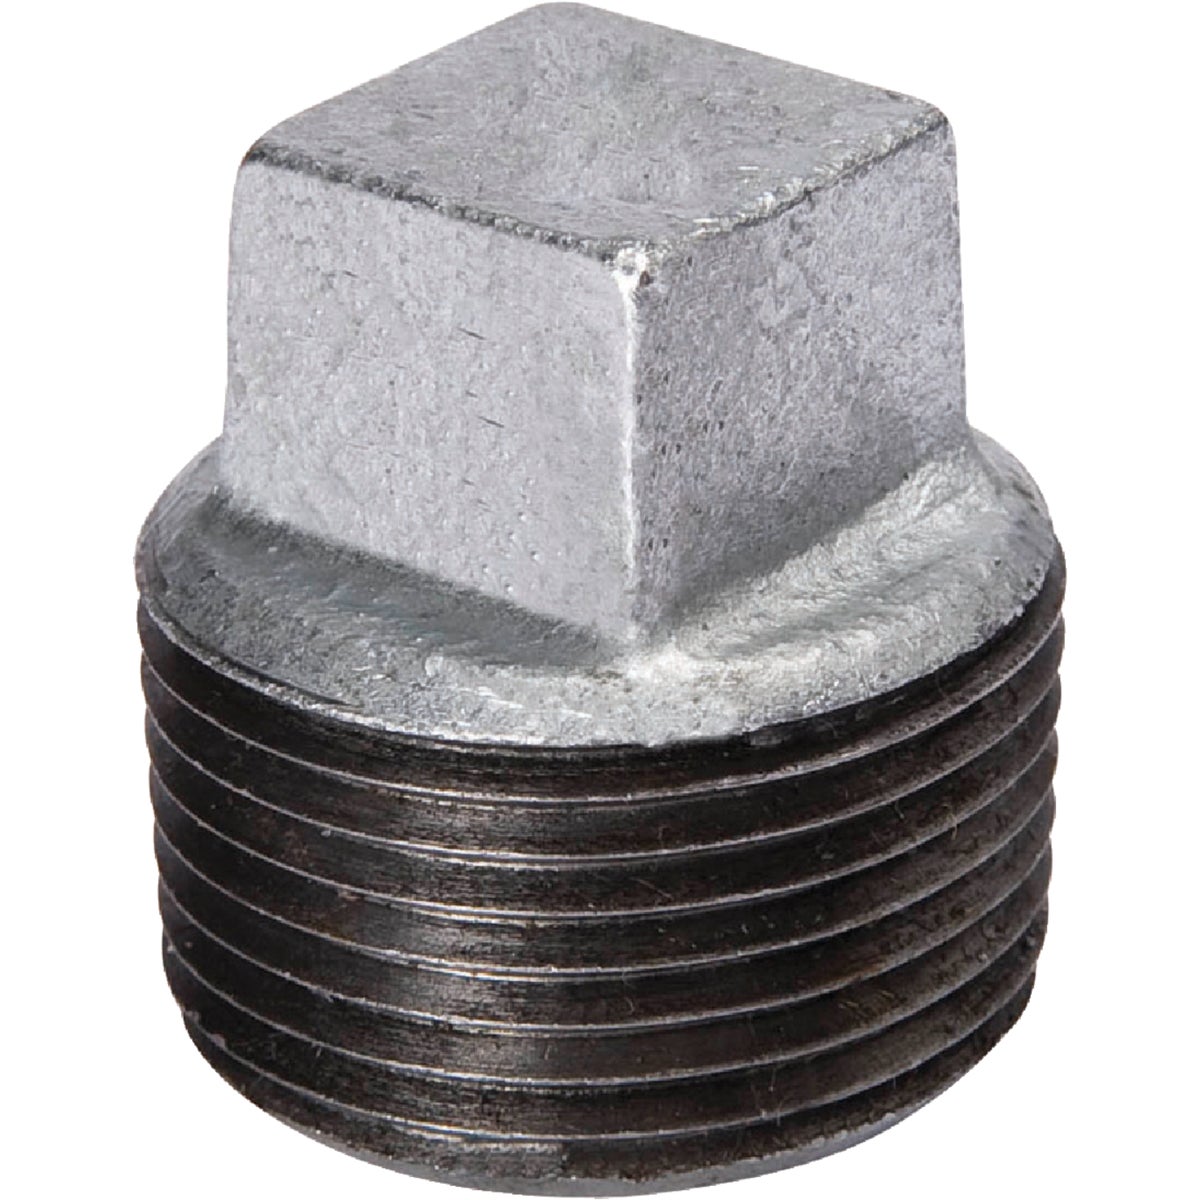 Southland 1-1/2 In. Malleable Iron Galvanized Plug